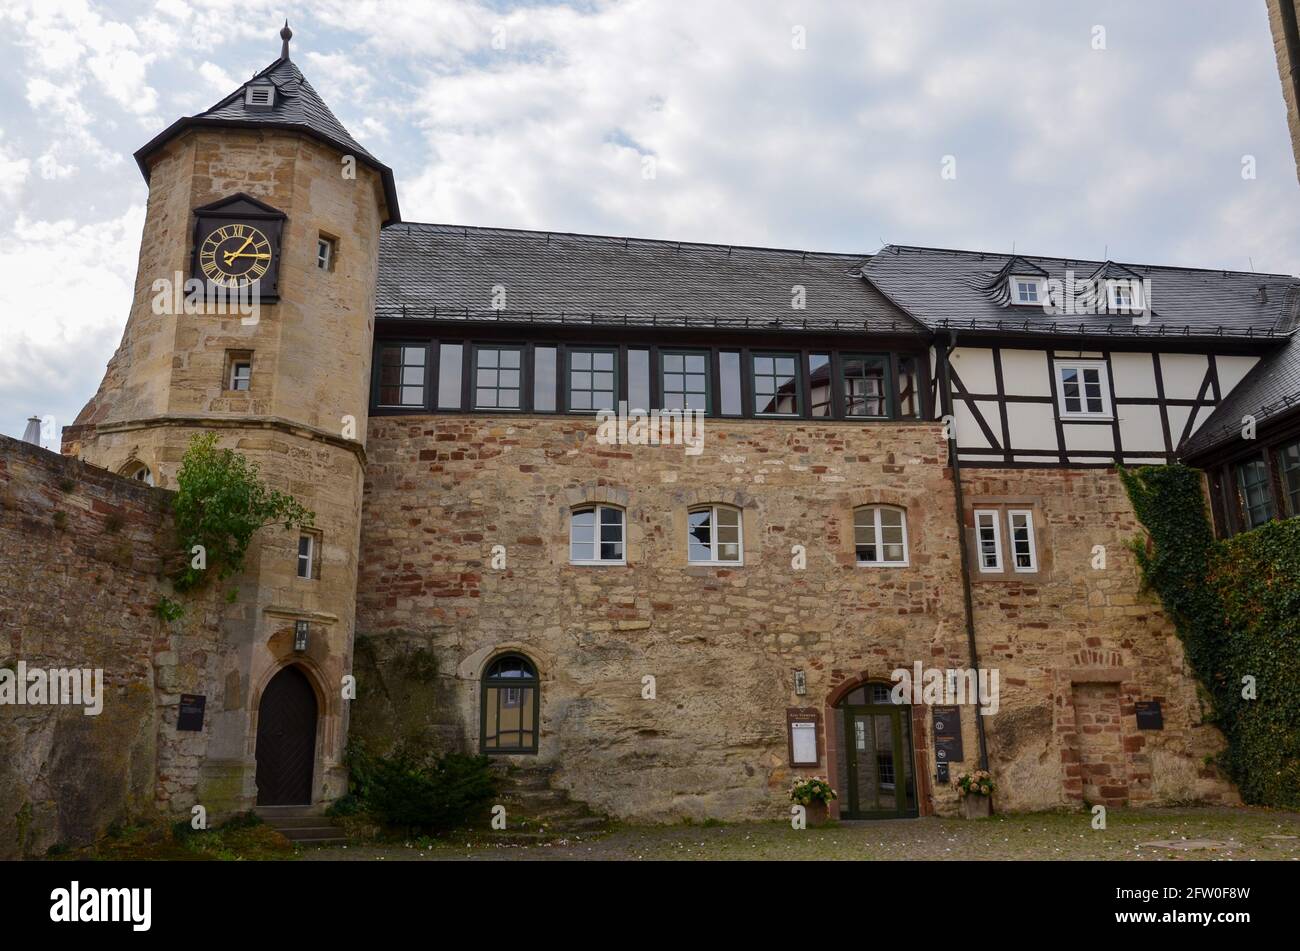 Waldeck, Hessen, Germany - September 11 2011: The fortress Waldeck at the Edersee with cloudy sky in the background Stock Photo